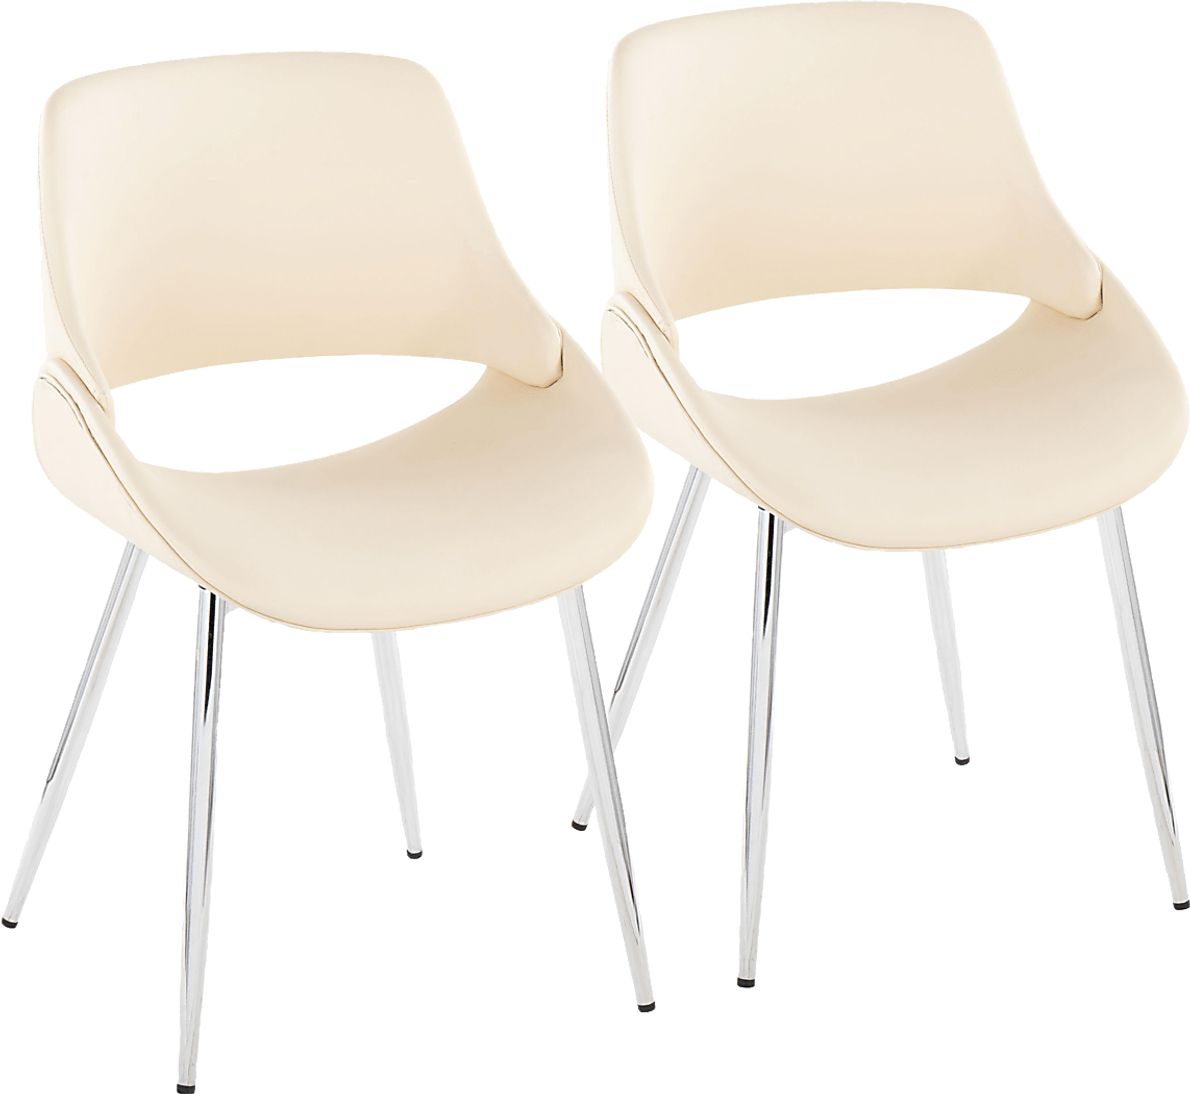 Stroble VII Cream Dining Chair, Set of 2